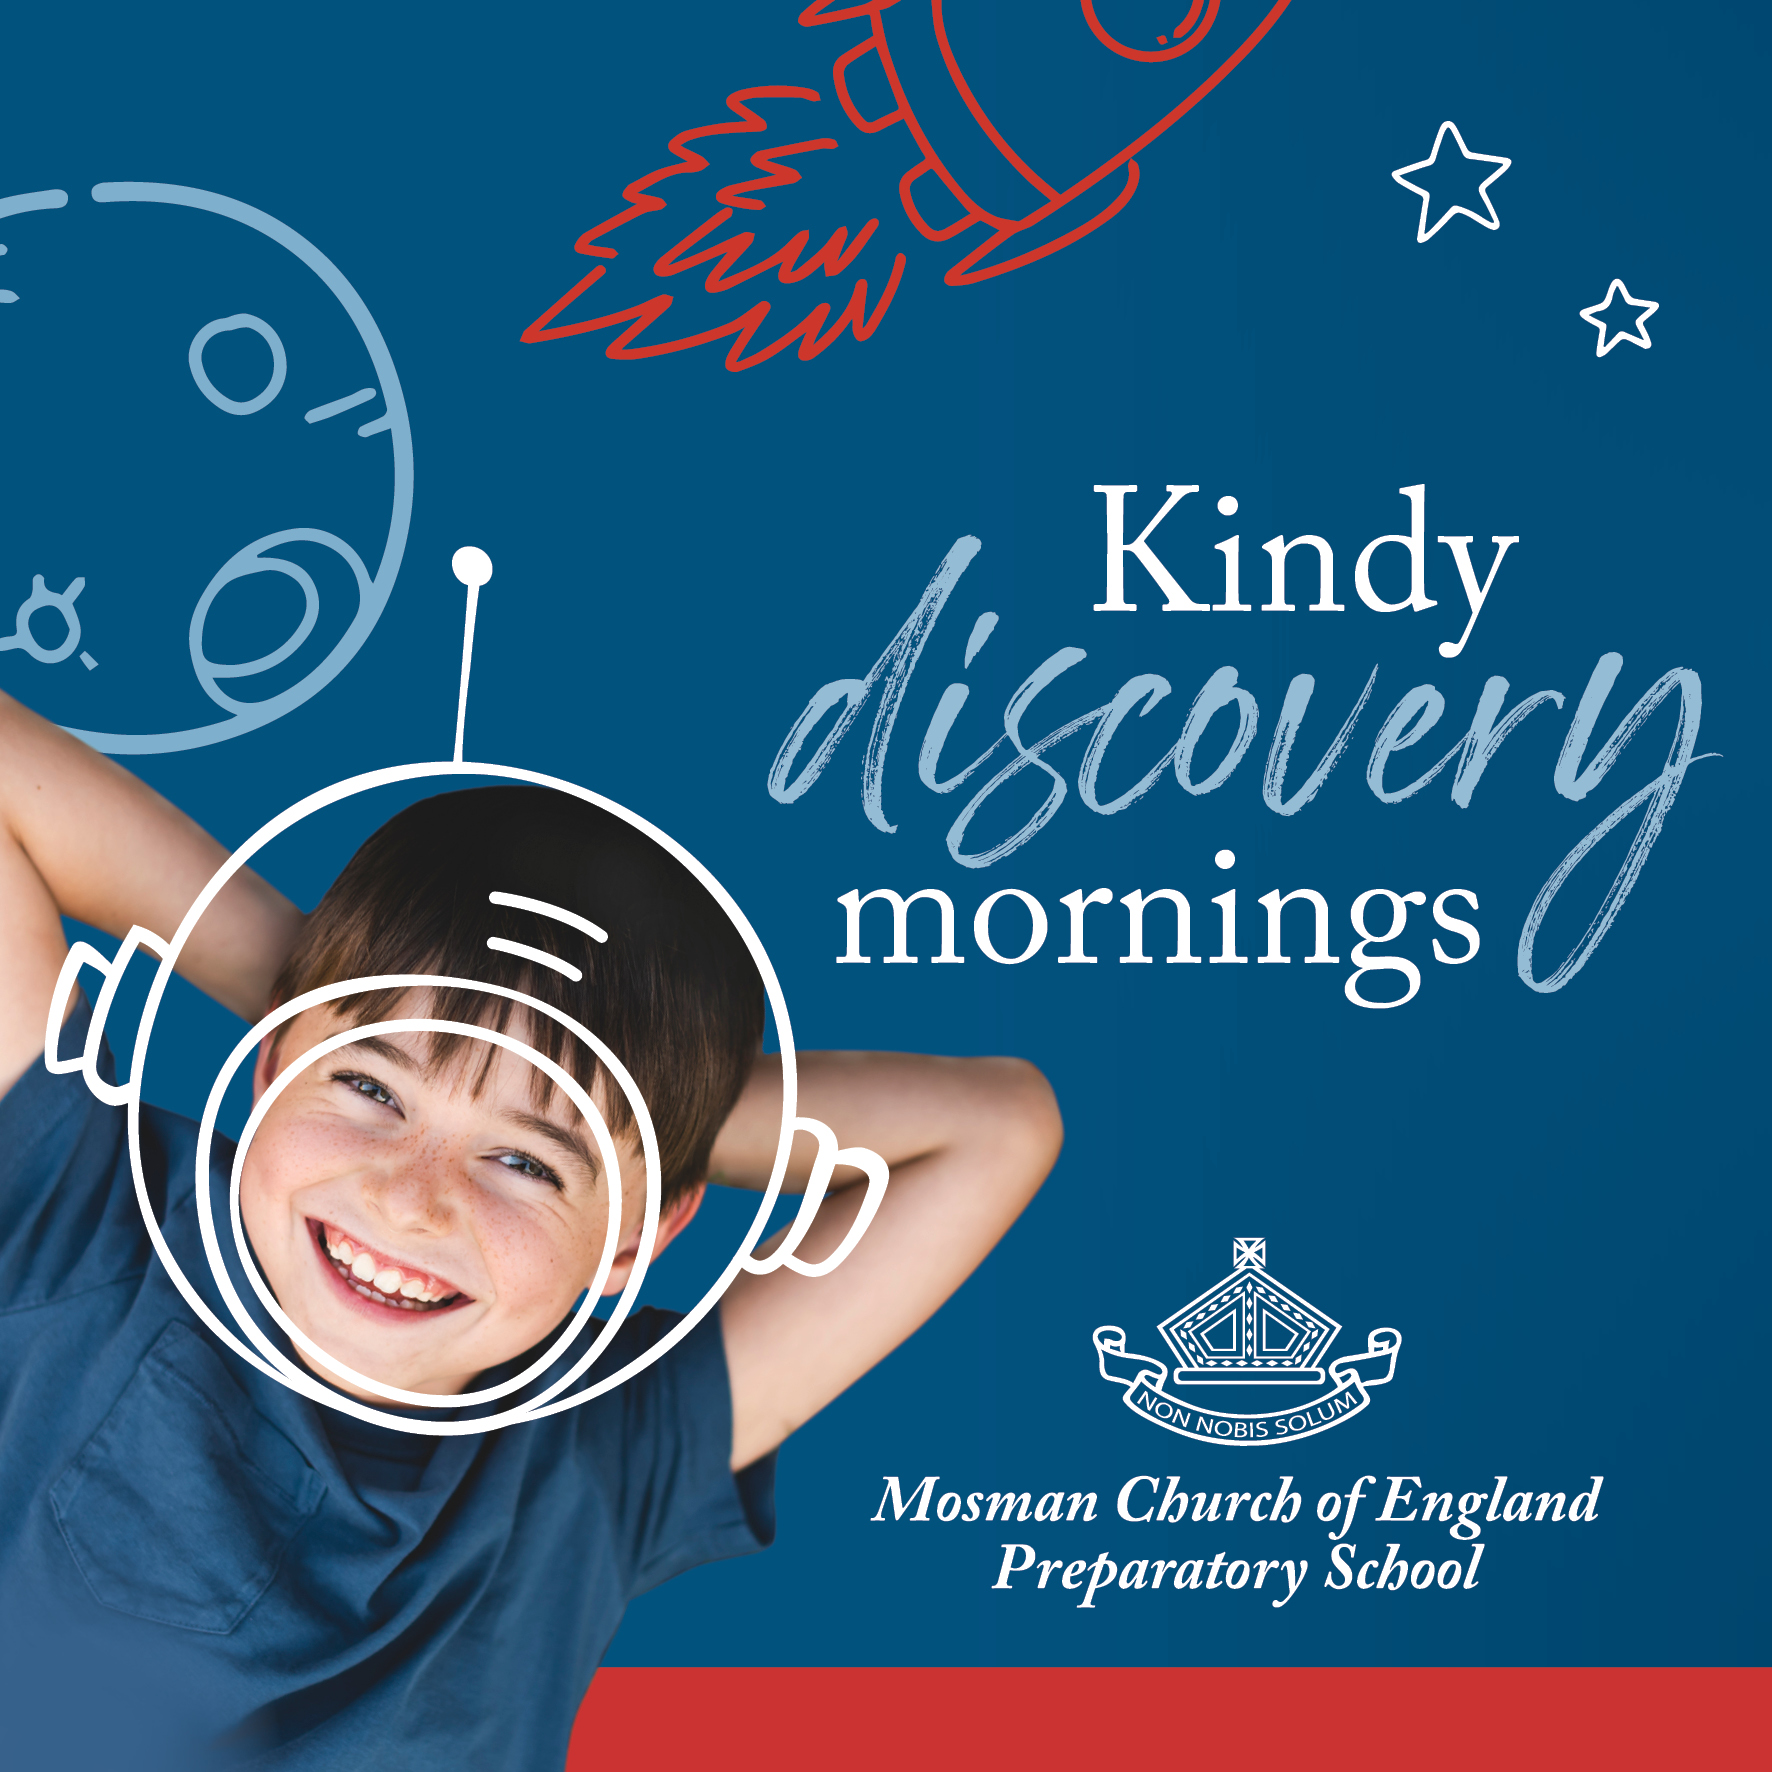 Kindy discovery morning